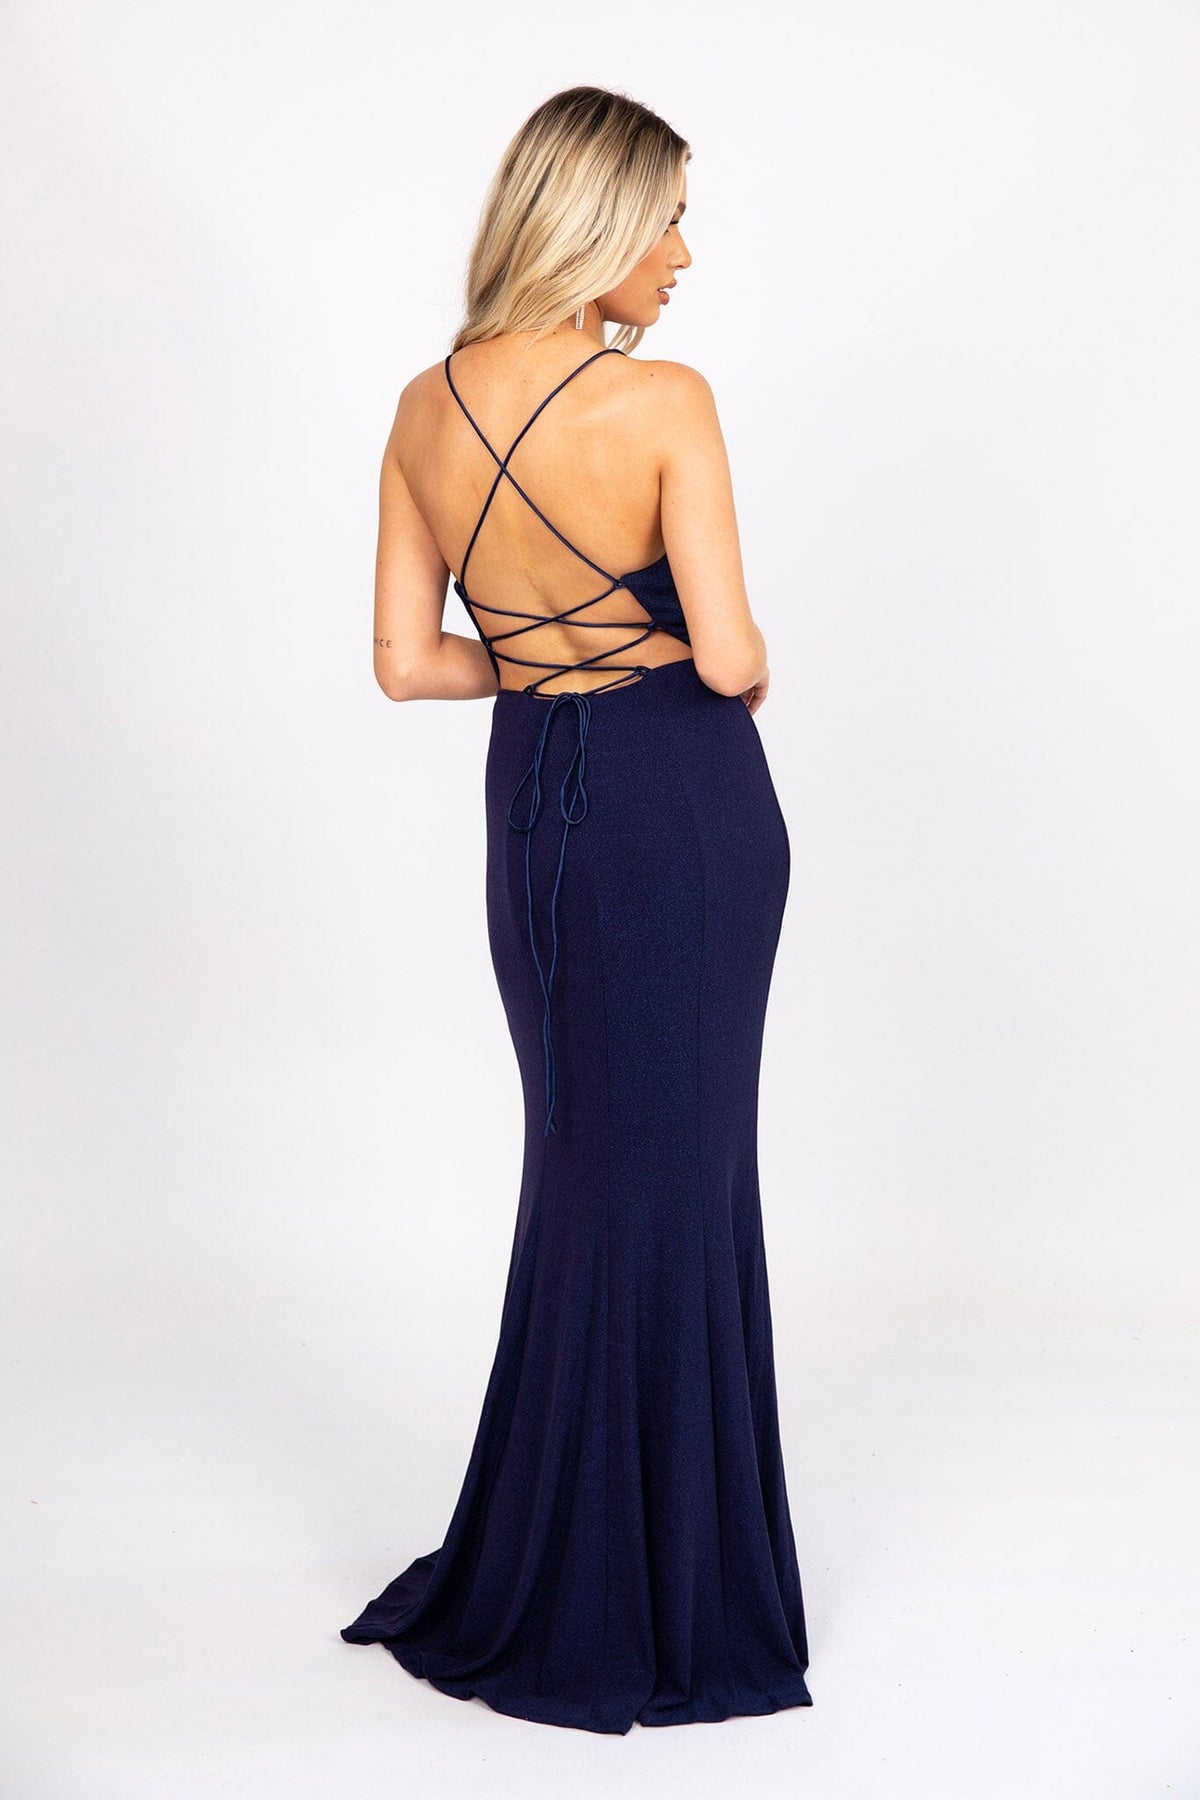 Lace Up Open Back Design of Shimmer Navy Blue Fitted Full Length Evening Gown with Cowl Neckline, Thin Shoulder Straps and Side Split